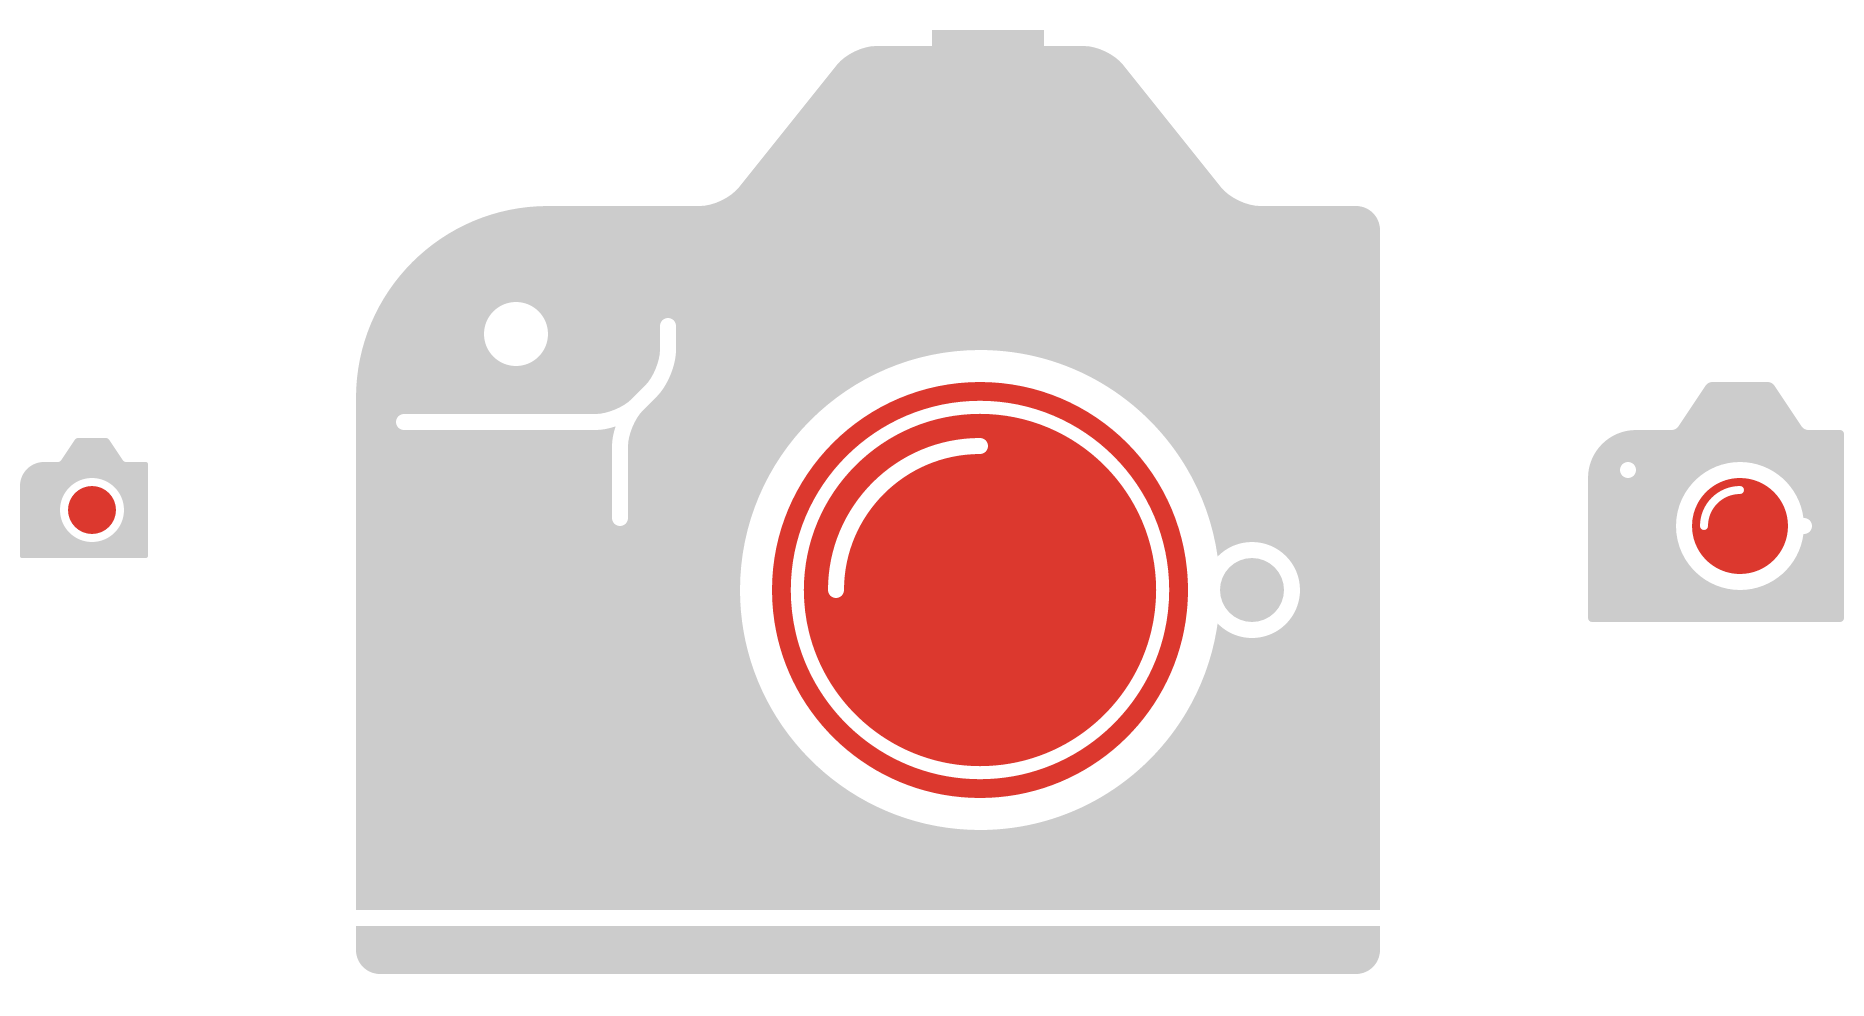 An example of Iconic's camera icon in three distinct sizes.